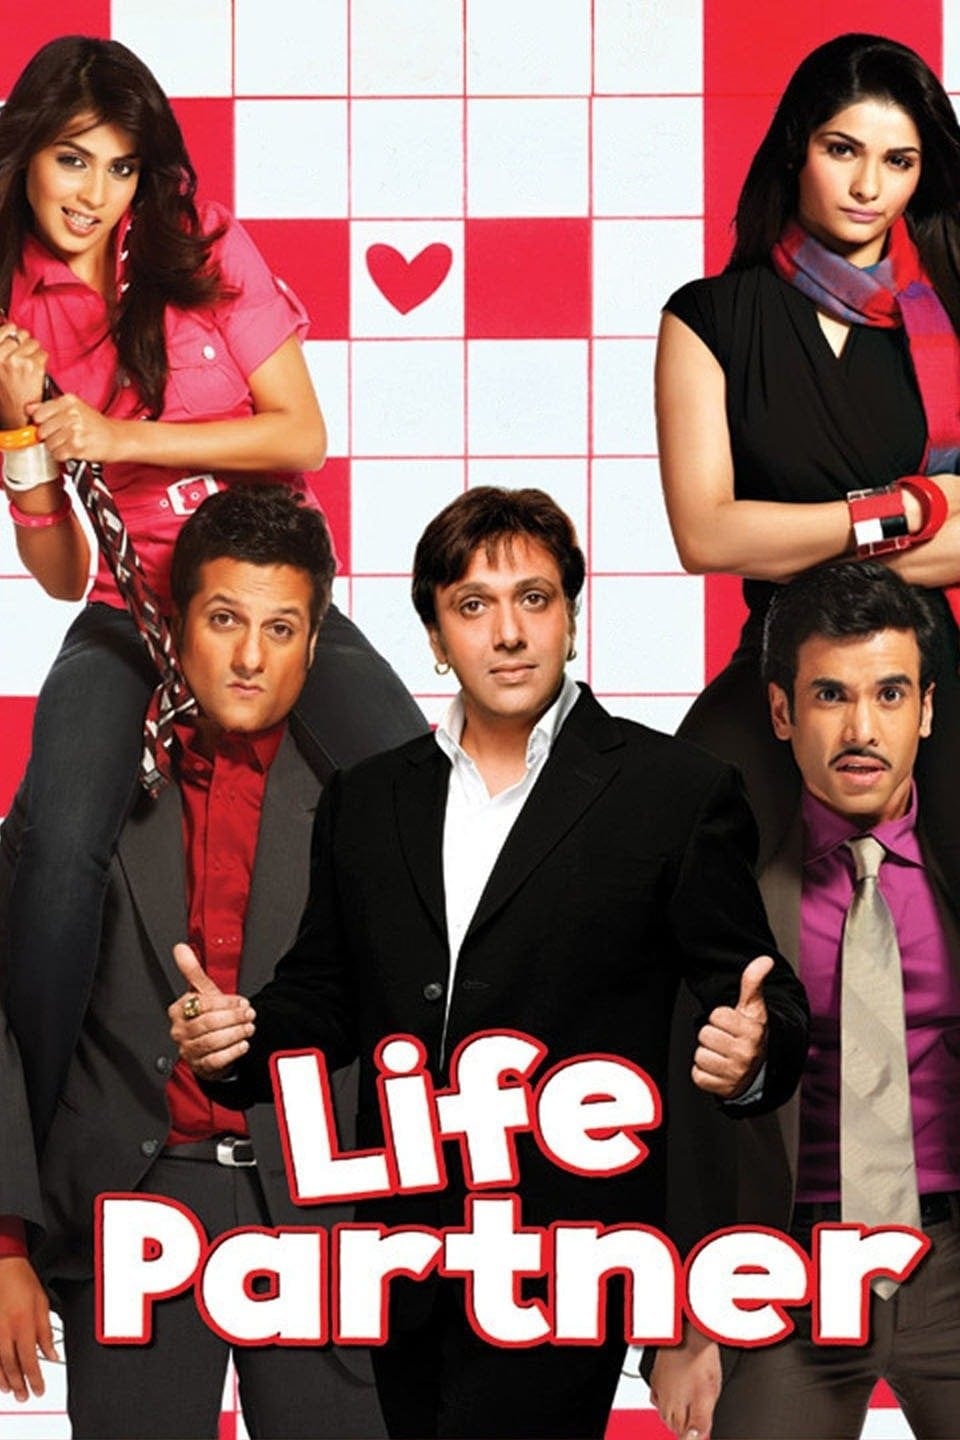 Poster for the movie "Life Partner"